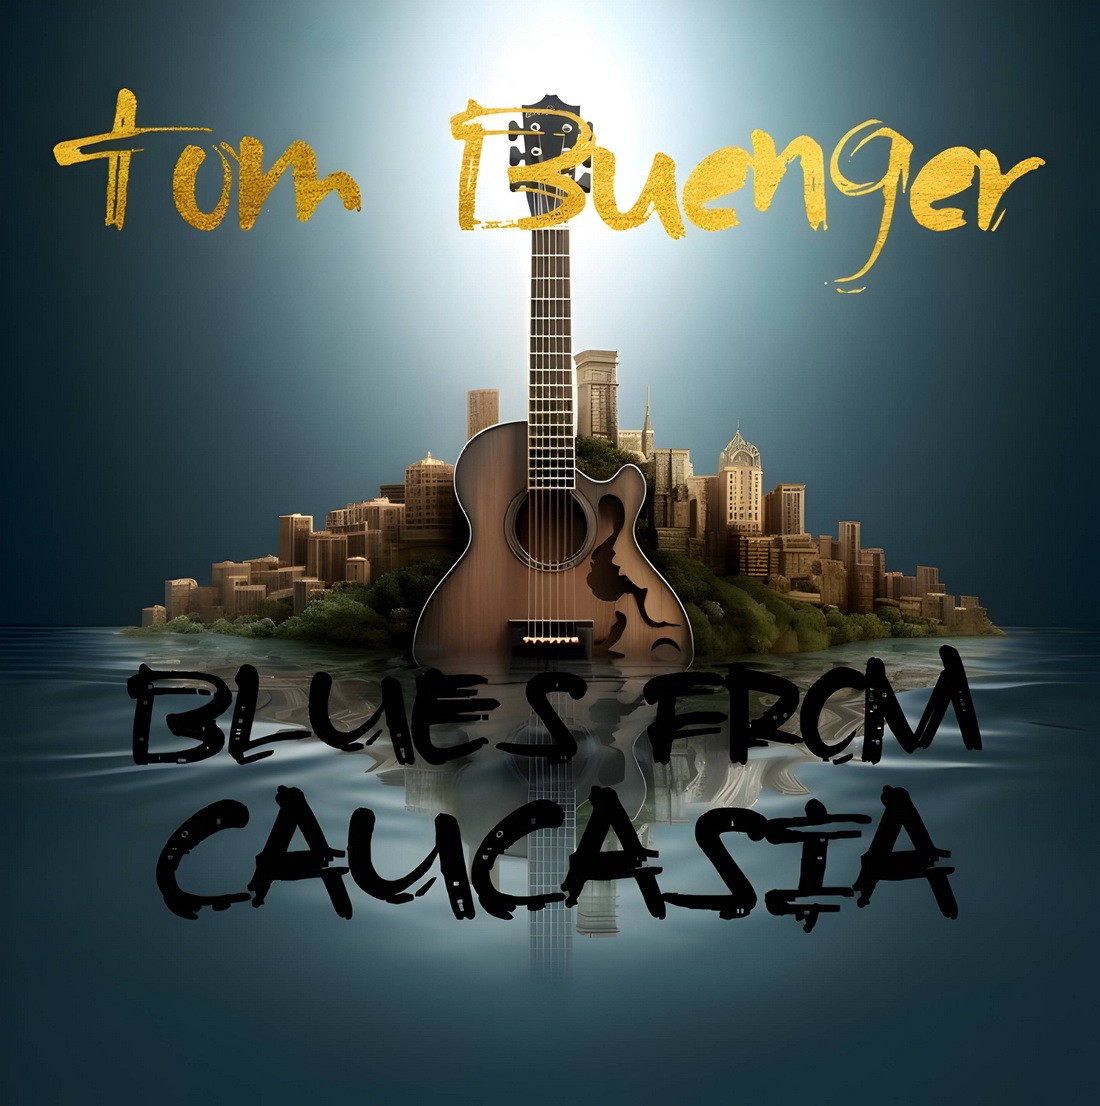 Tom Buenger - Blues From Caucasia